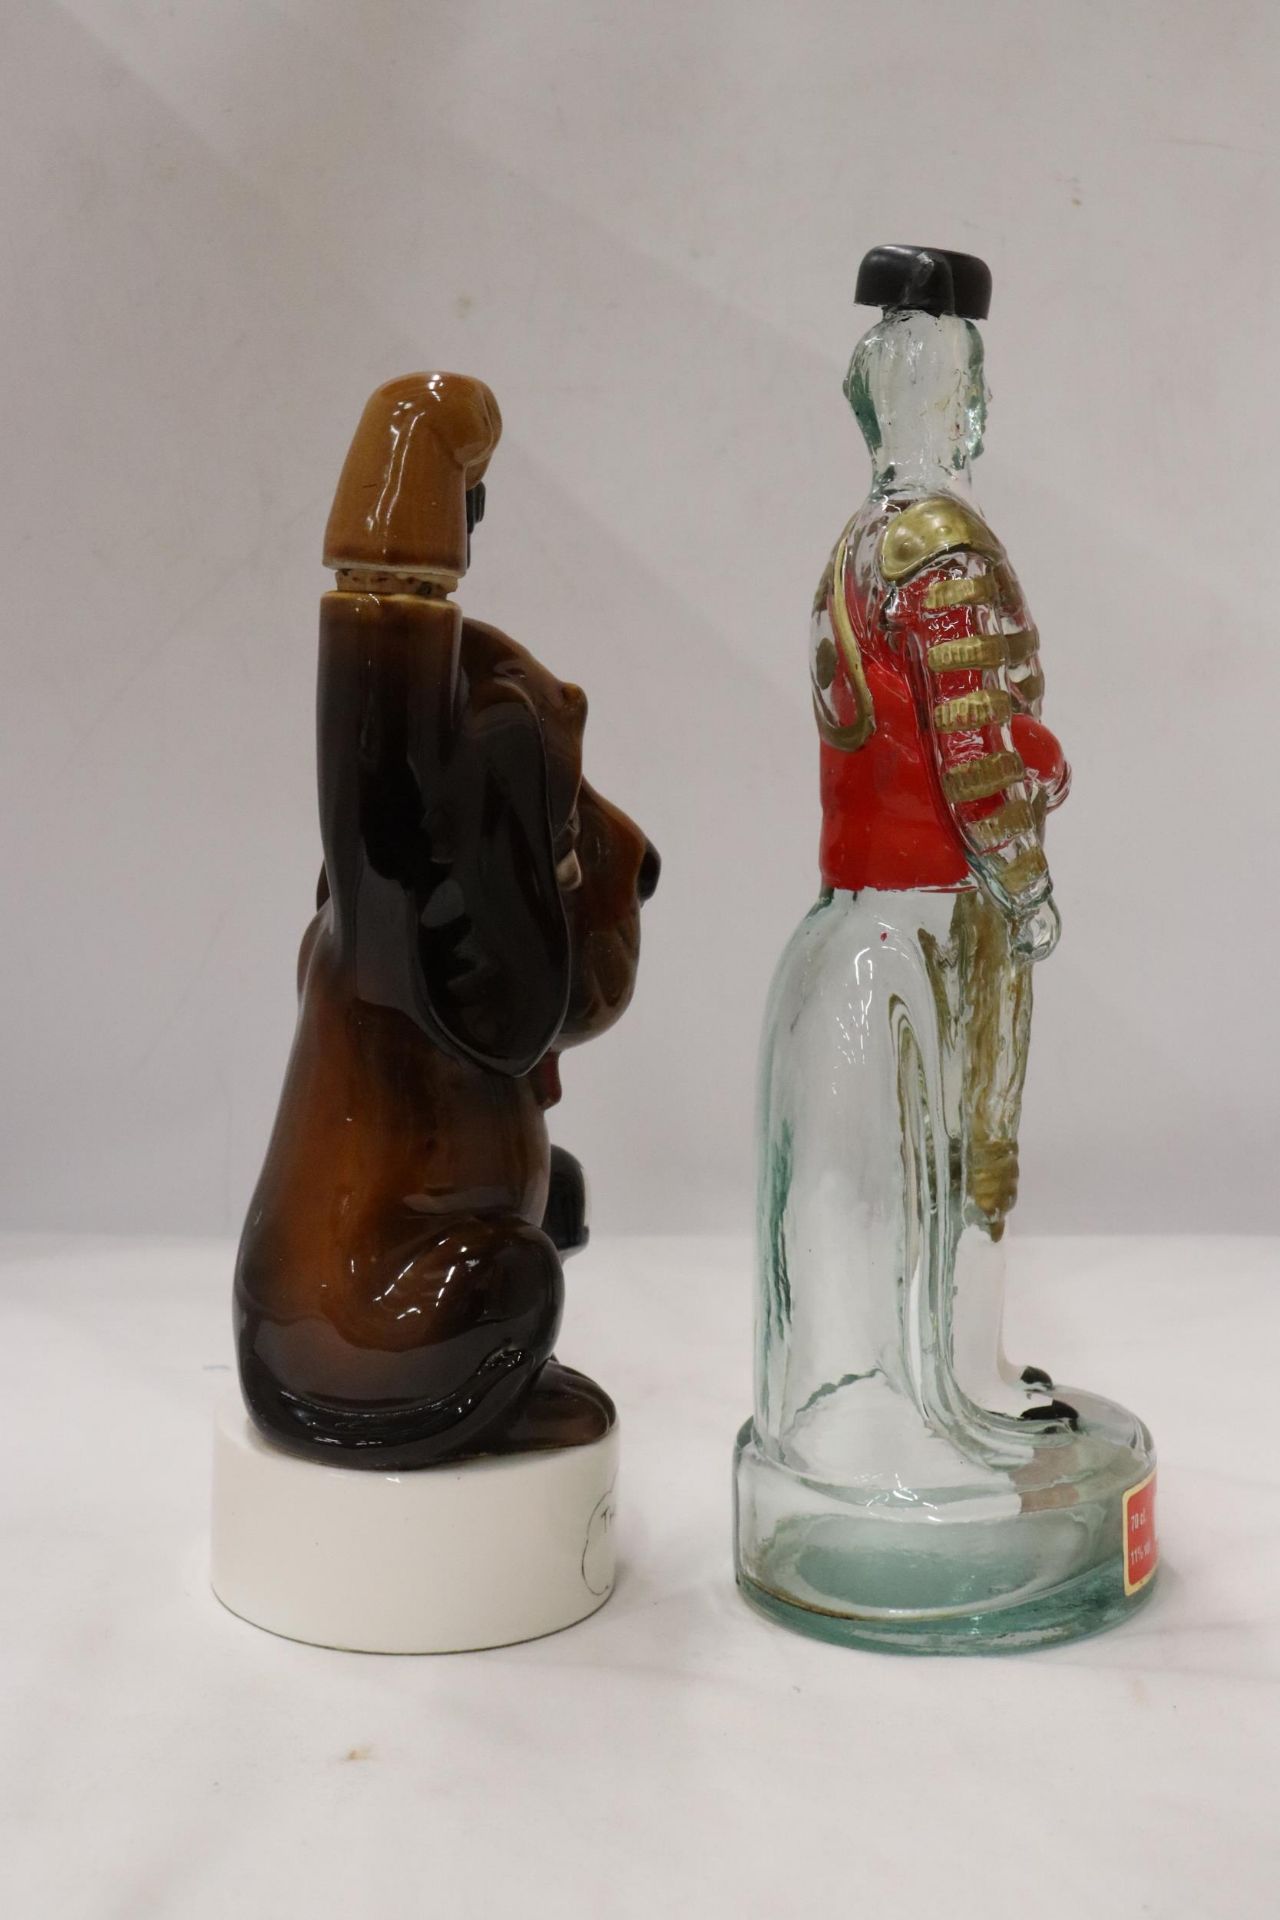 AN UNUSUAL SANGRIA DECANTER IN THE FORM OF A MATADOR AND 'THE LAST SHOT' DROOPY DECANTER - Bild 4 aus 7